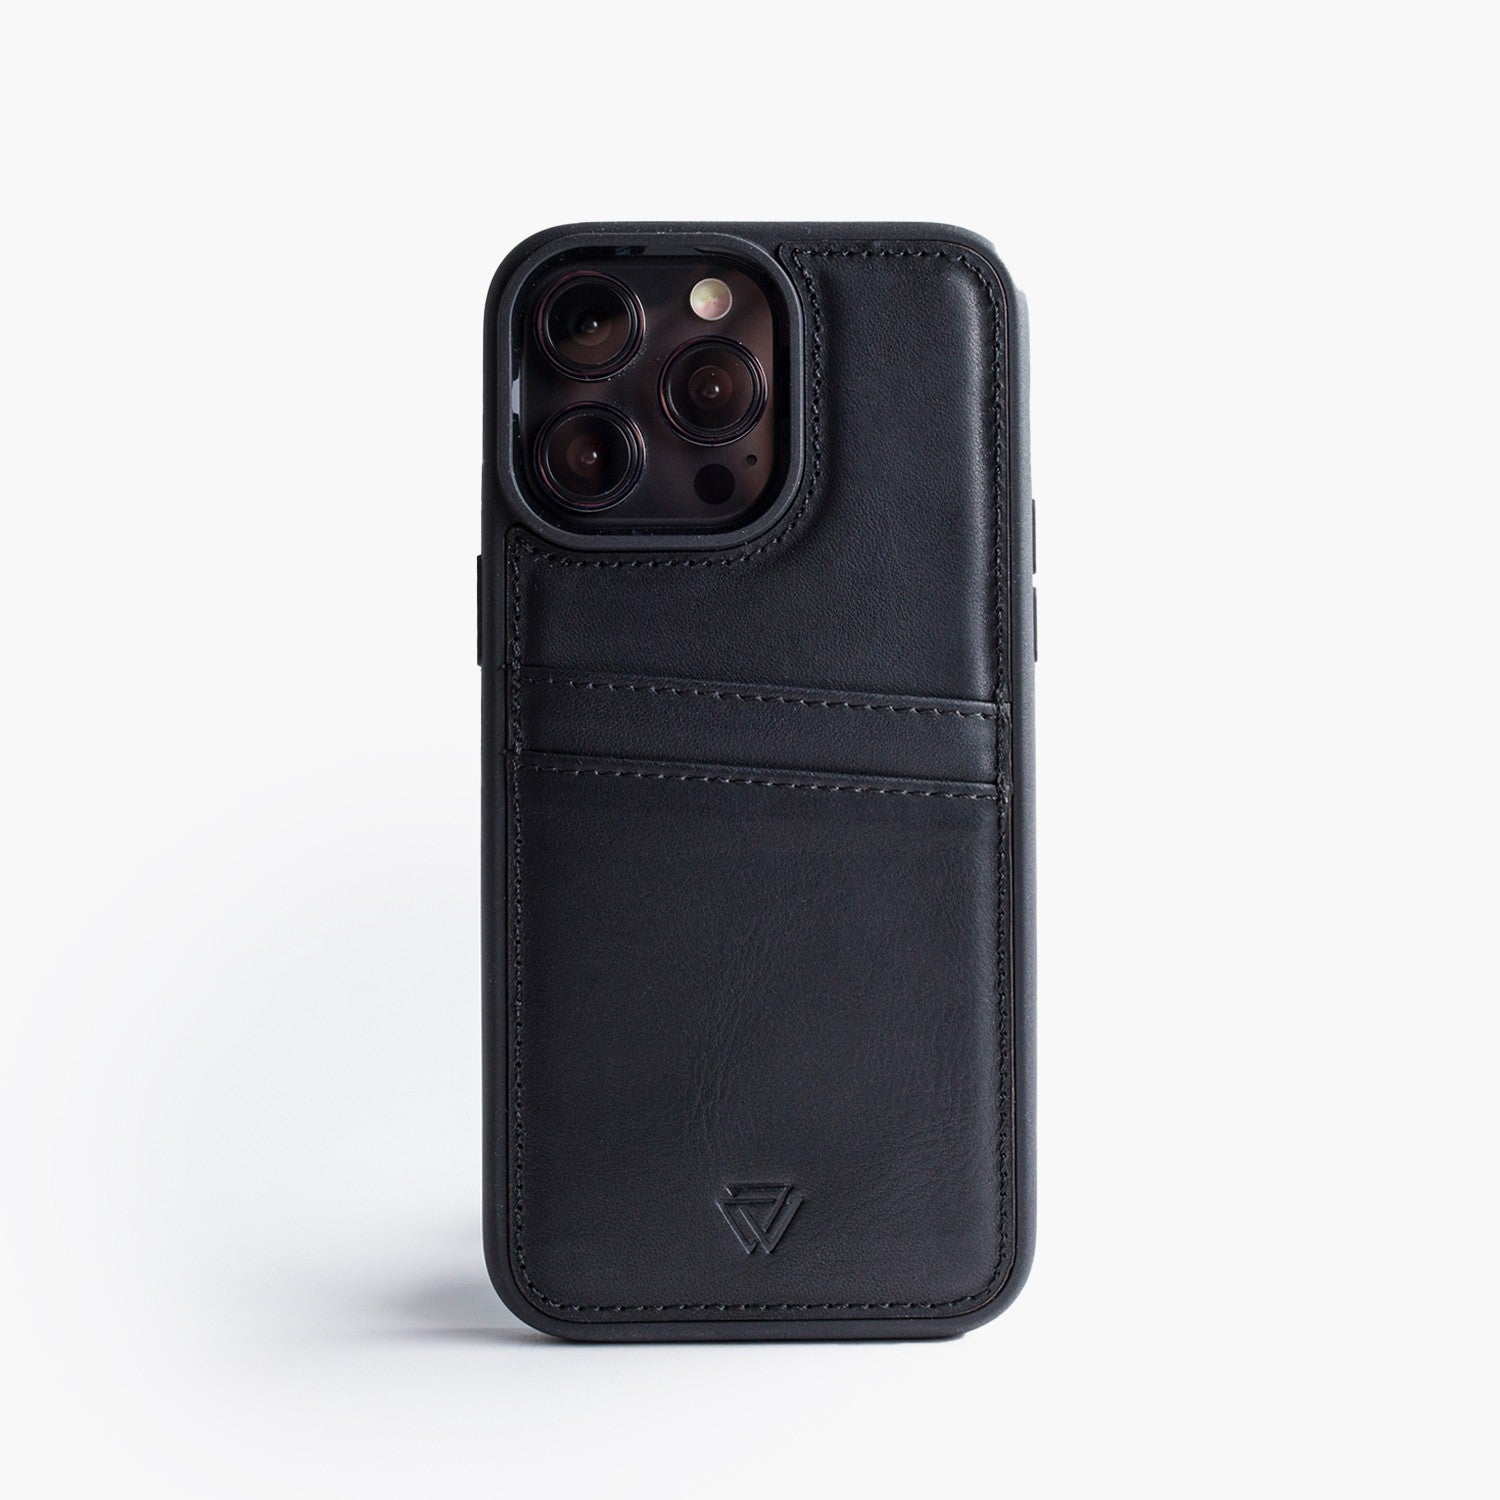 Wachikopa leather Back Cover C.C. Case for iPhone 12 Black